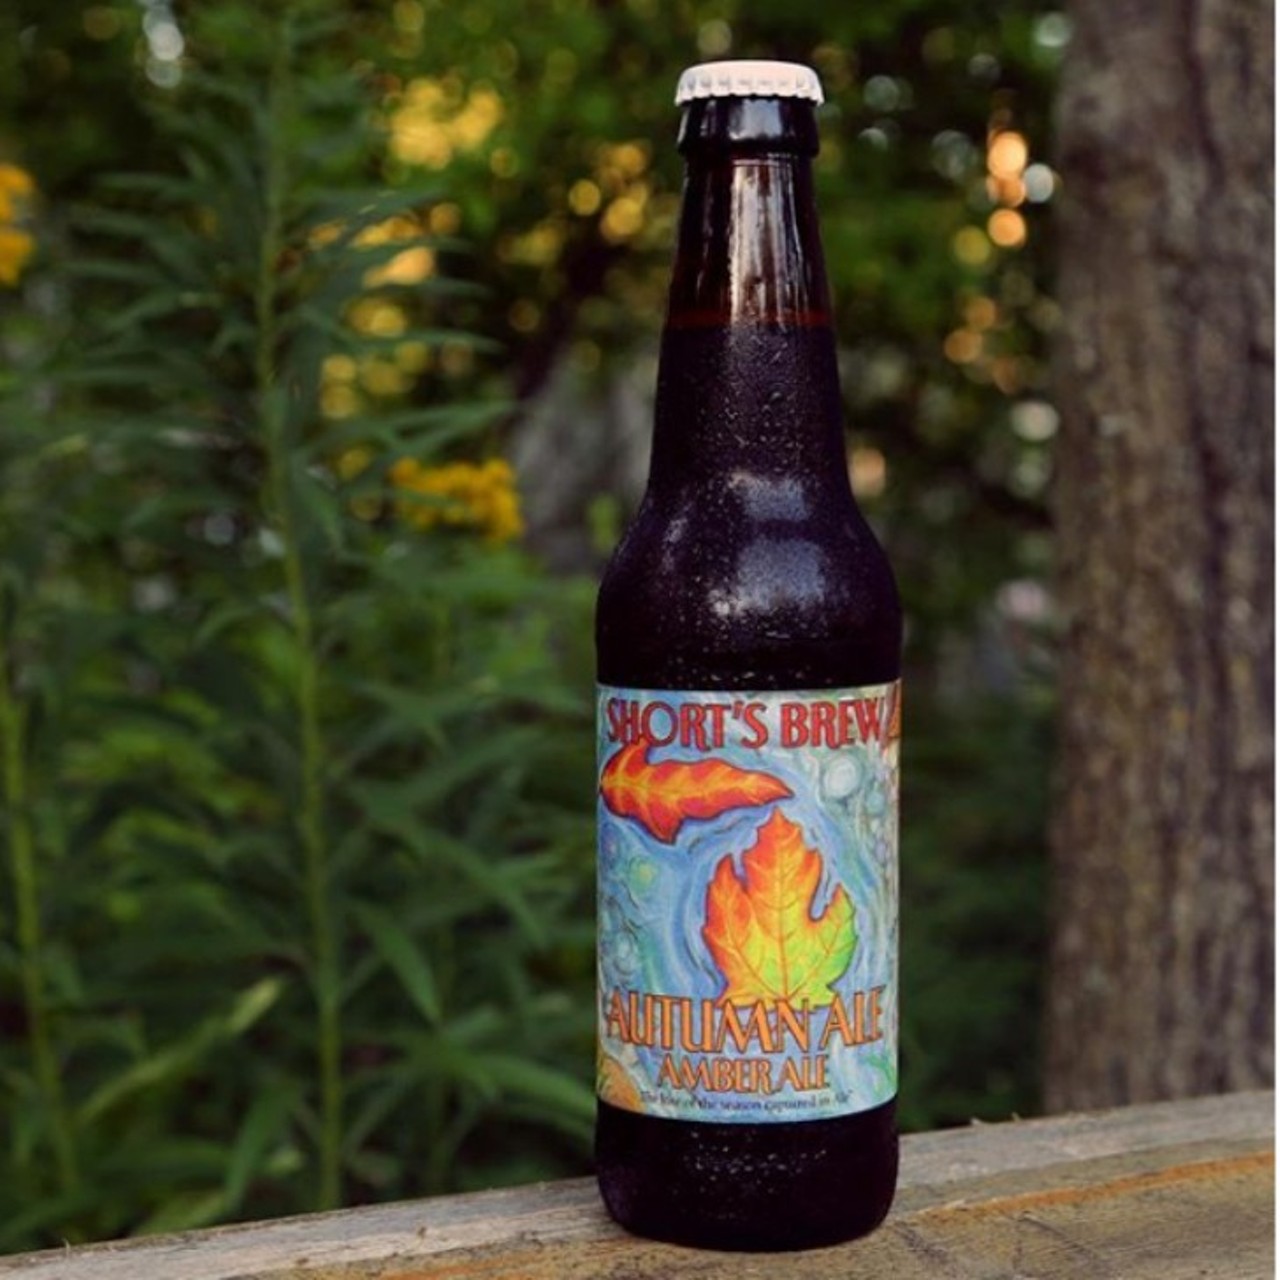 Short&#146;s Autumn Ale
Bellaire - 5.4%
Back in 2006, Autumn Ale won a silver medal at the Great American Beer Festival. Its flavor is the perfect mix of sweet and bitter.
Photo courtesy of @shortsbrewing